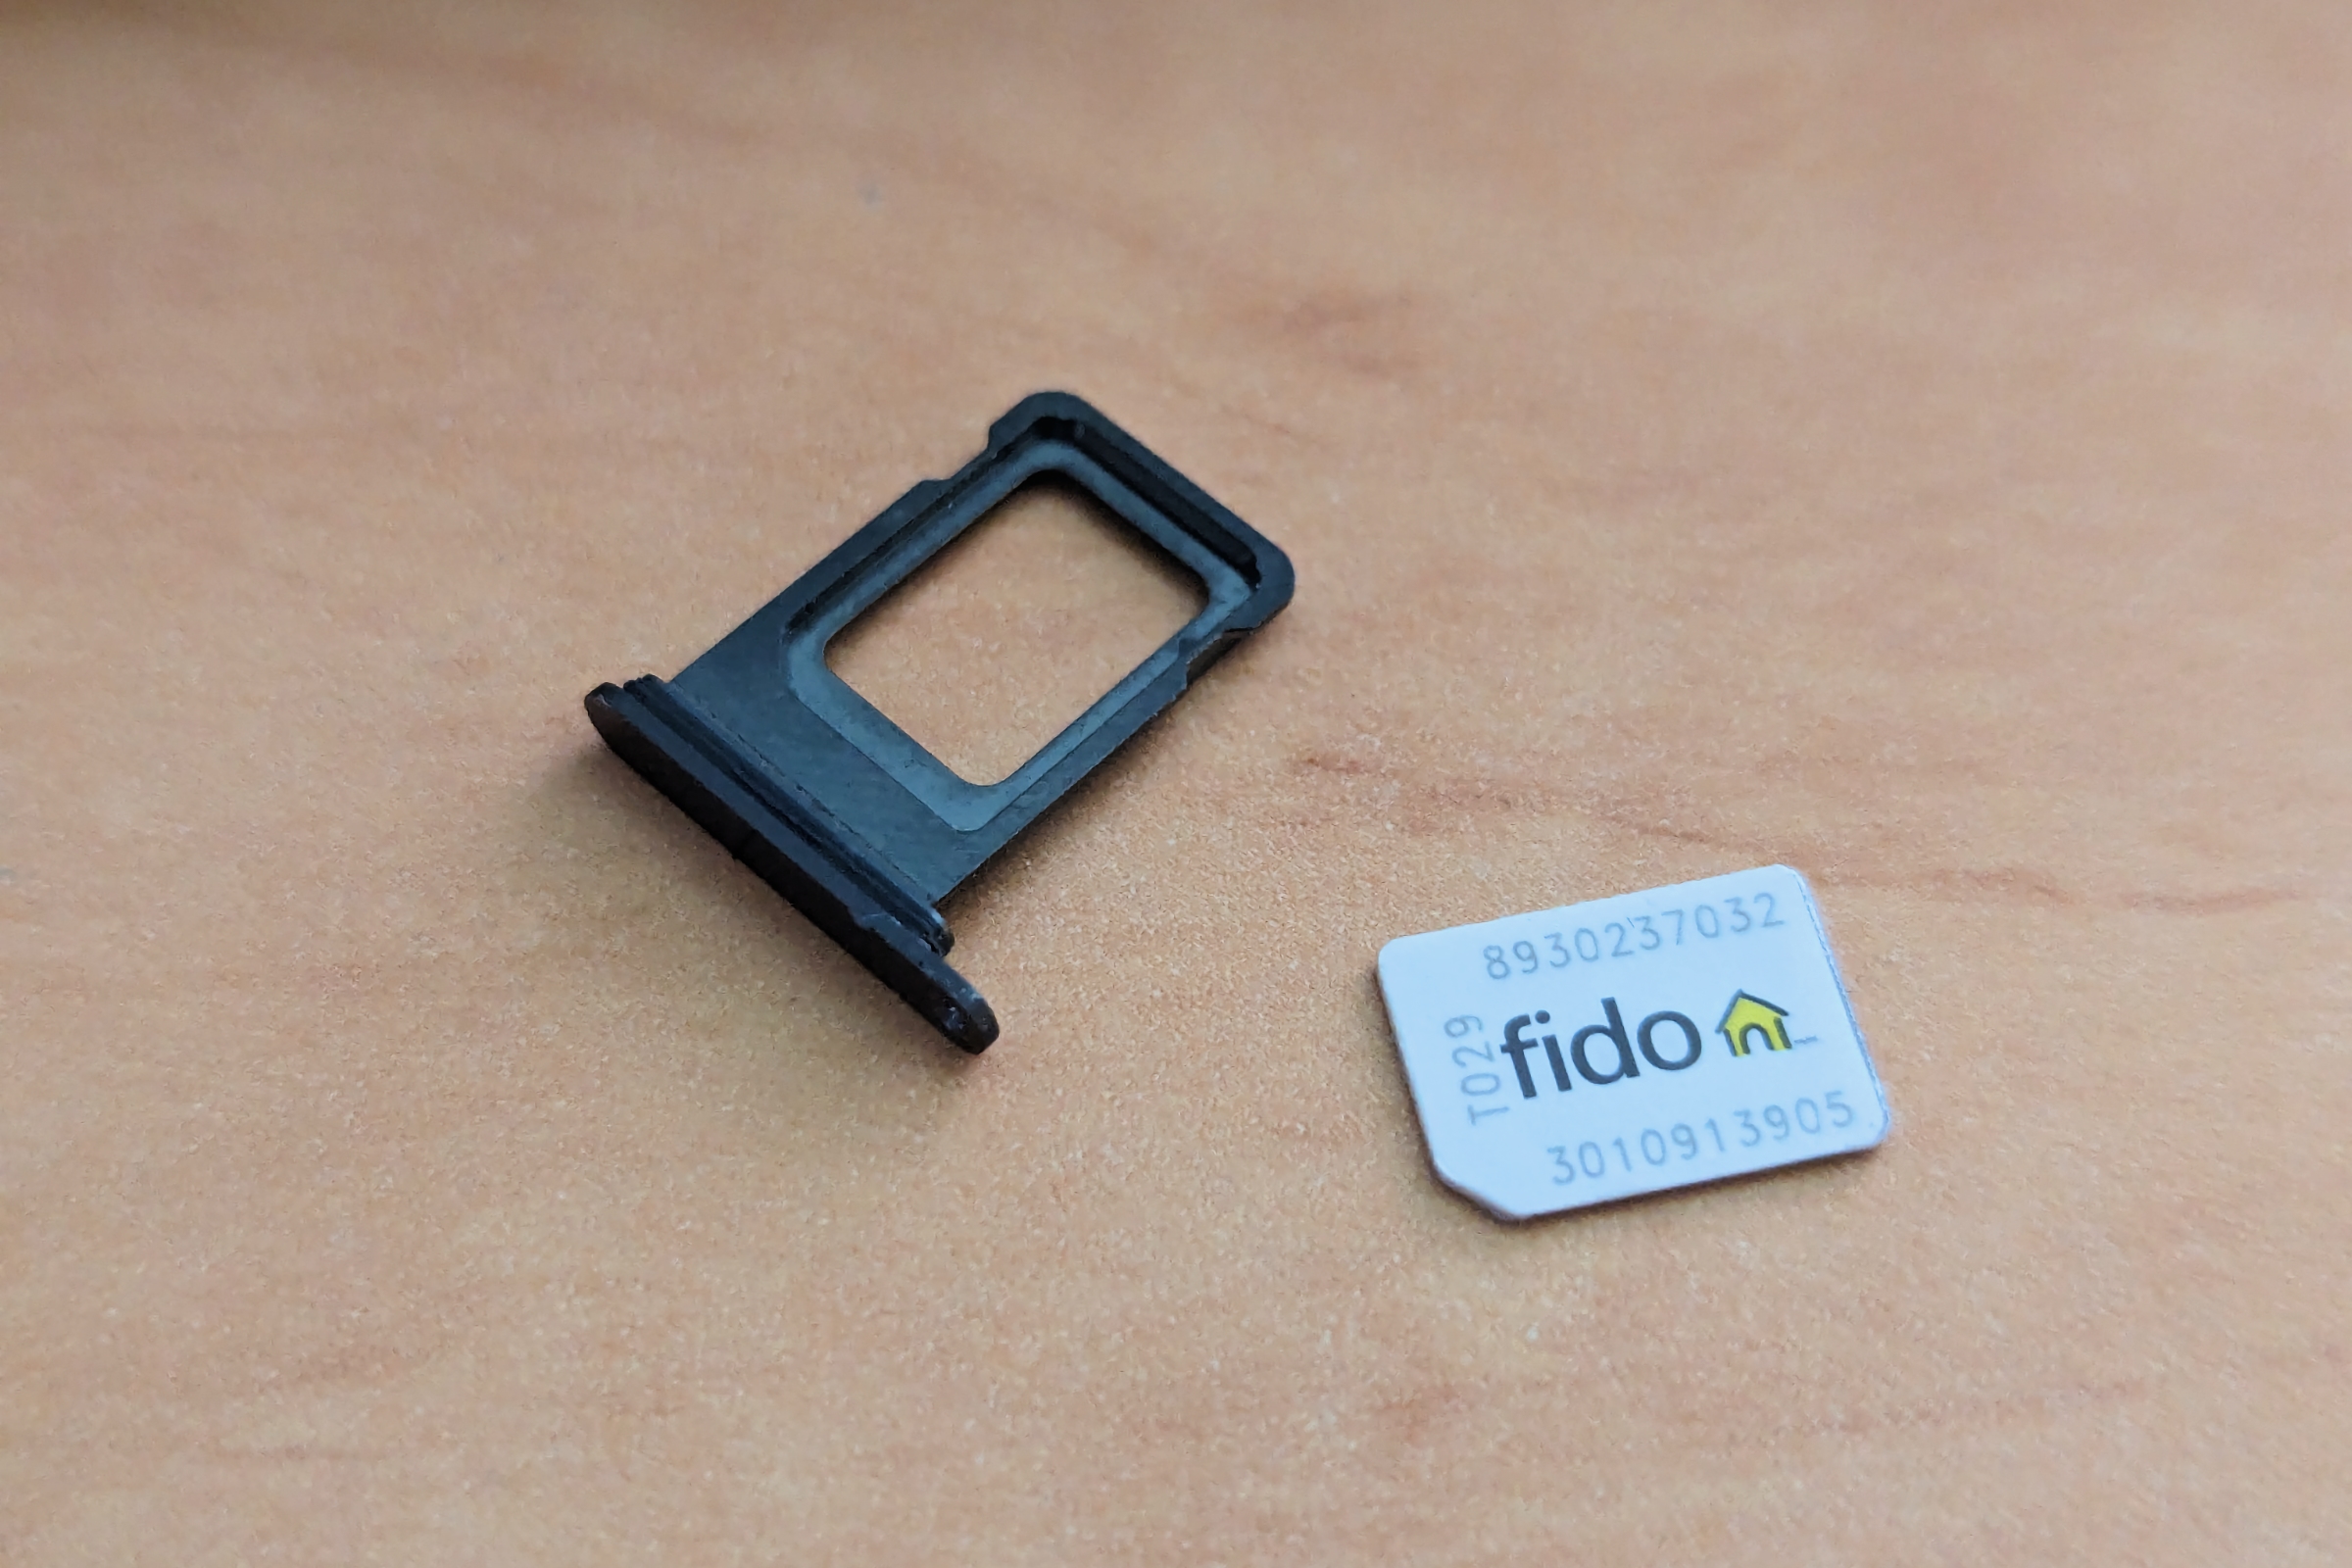 SIM card tray and nano-SIM card from an iPhone 14 Pro Max.